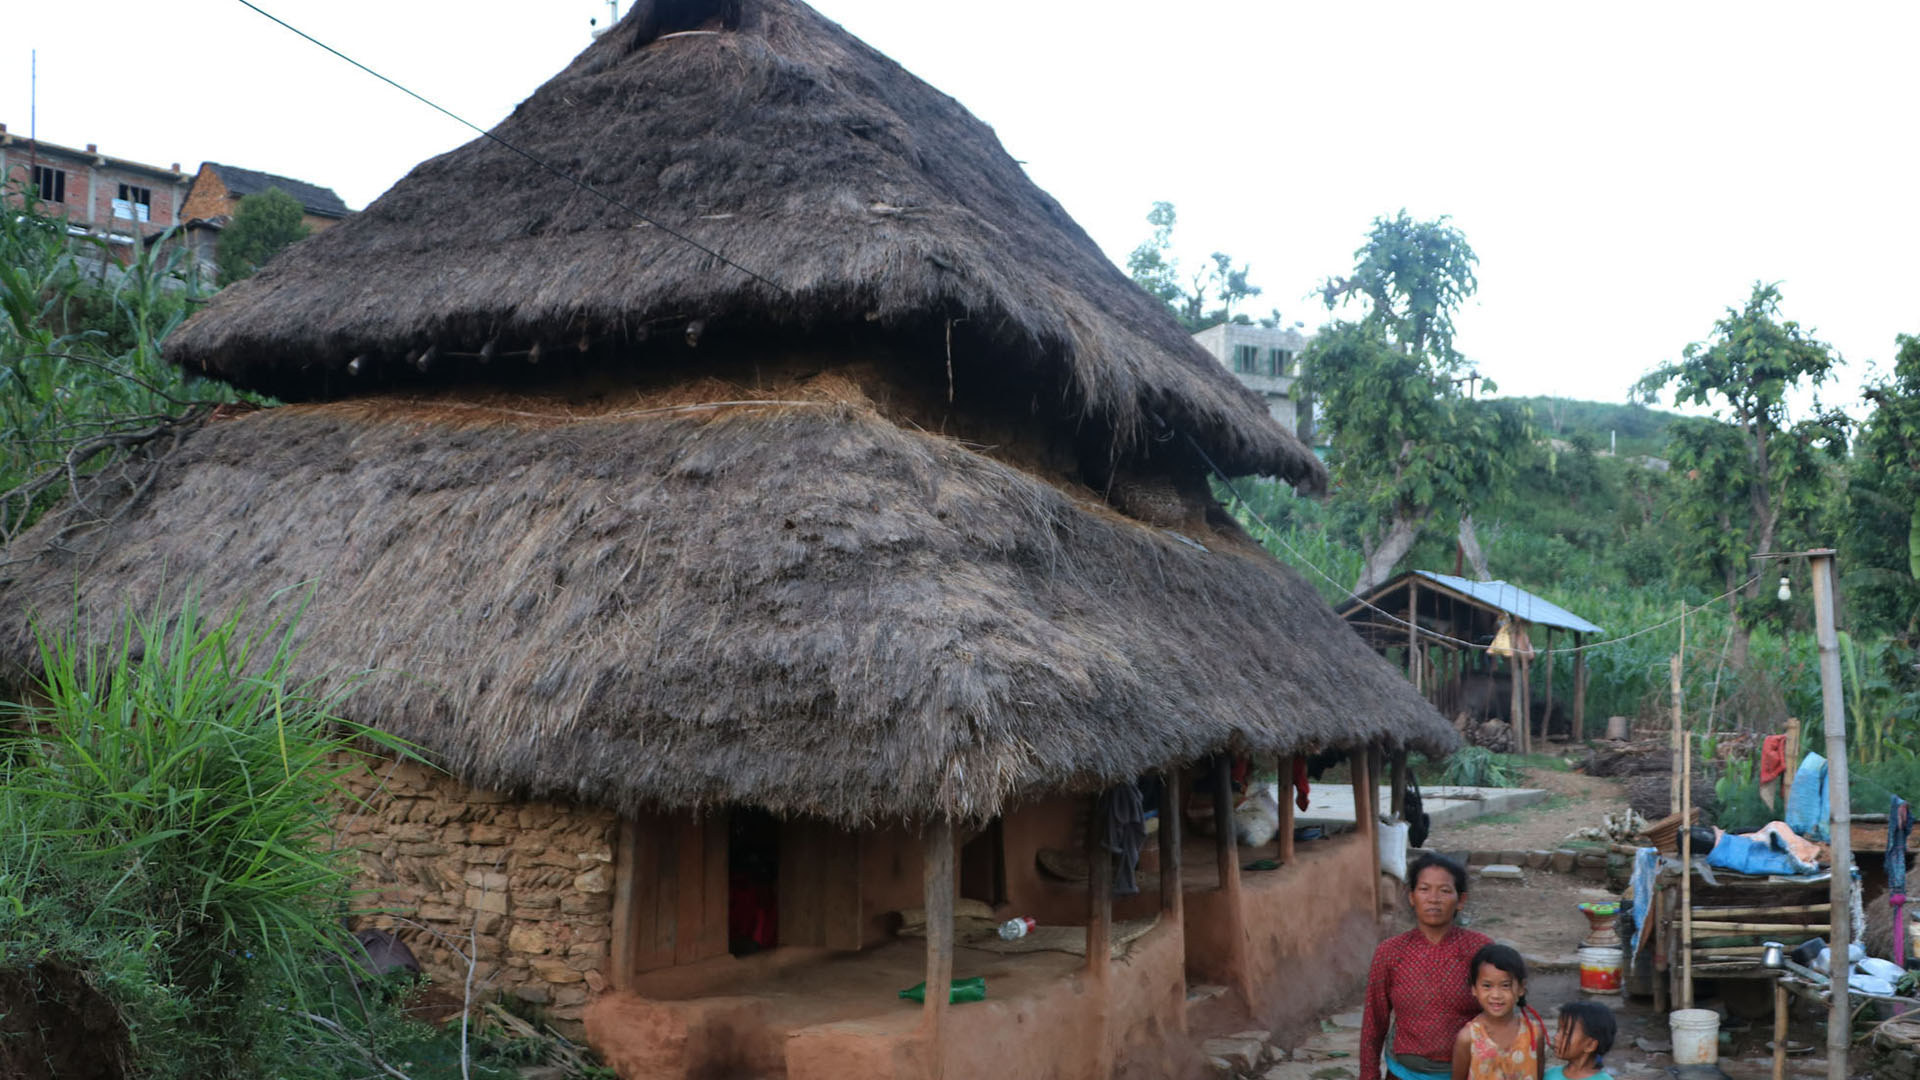 160000 Thatched Roofs to be replaced with Zinc Sheets